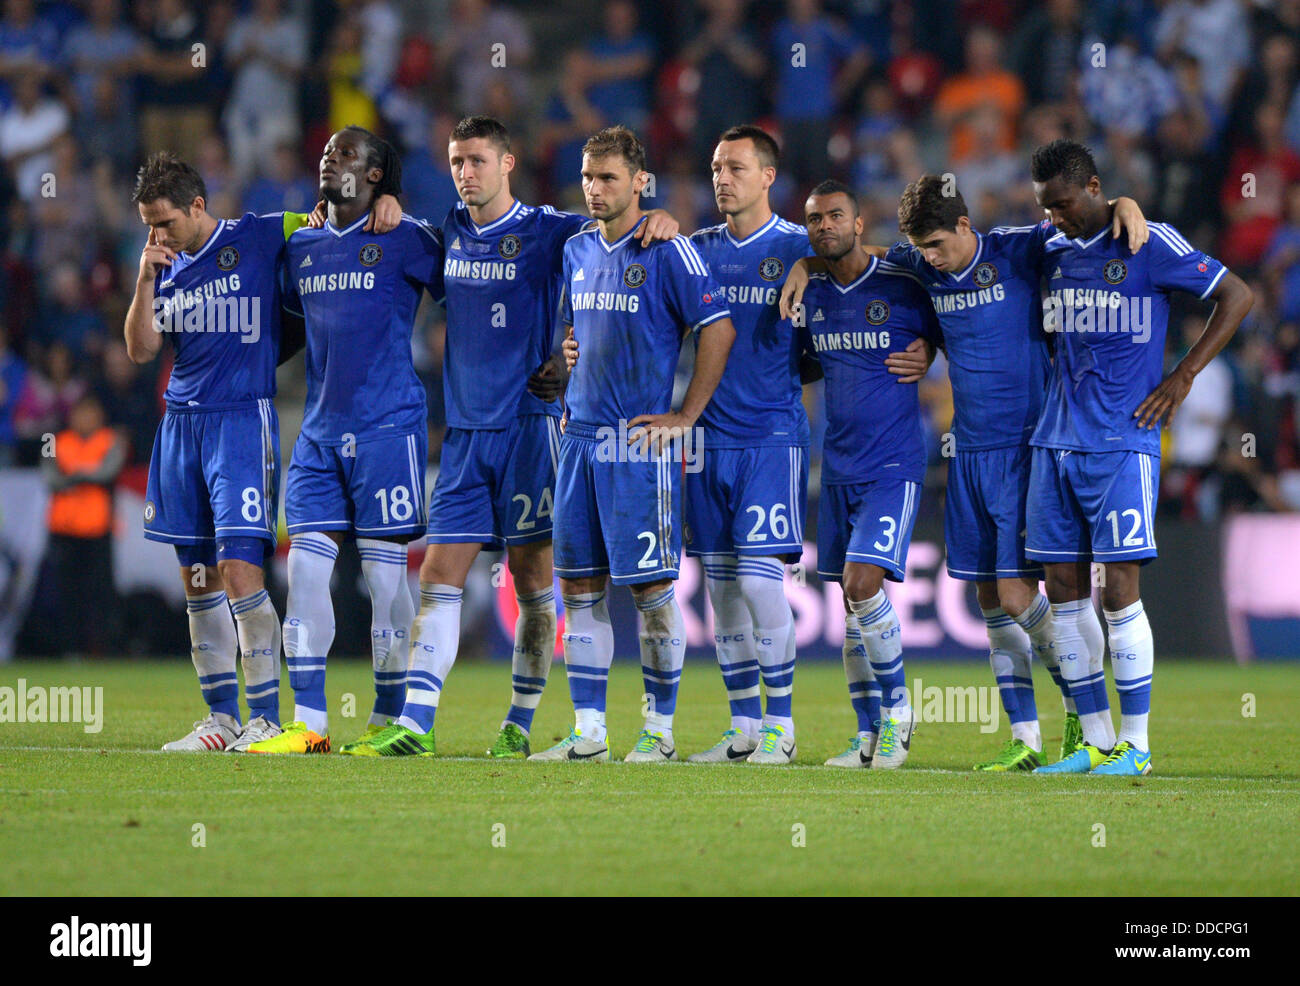 Prague, Czech Republic. 30th Aug, 2013. Frank Lampard, (L-R) Romelu Lukaku, Gary Cahill, Branislav Ivanovic, John Terry, Ashley Cole, Oscar and John Obi Mikel of Chelsea are seen during the penalty shoot-out of the UEFA Super Cup soccer match between Bayern Munich and Chelsea FC at Eden Stadium in Prague, Czech Republic, 30 August 2013. Photo: Thomas Eisenhuth/dpa/Alamy Live News Stock Photo